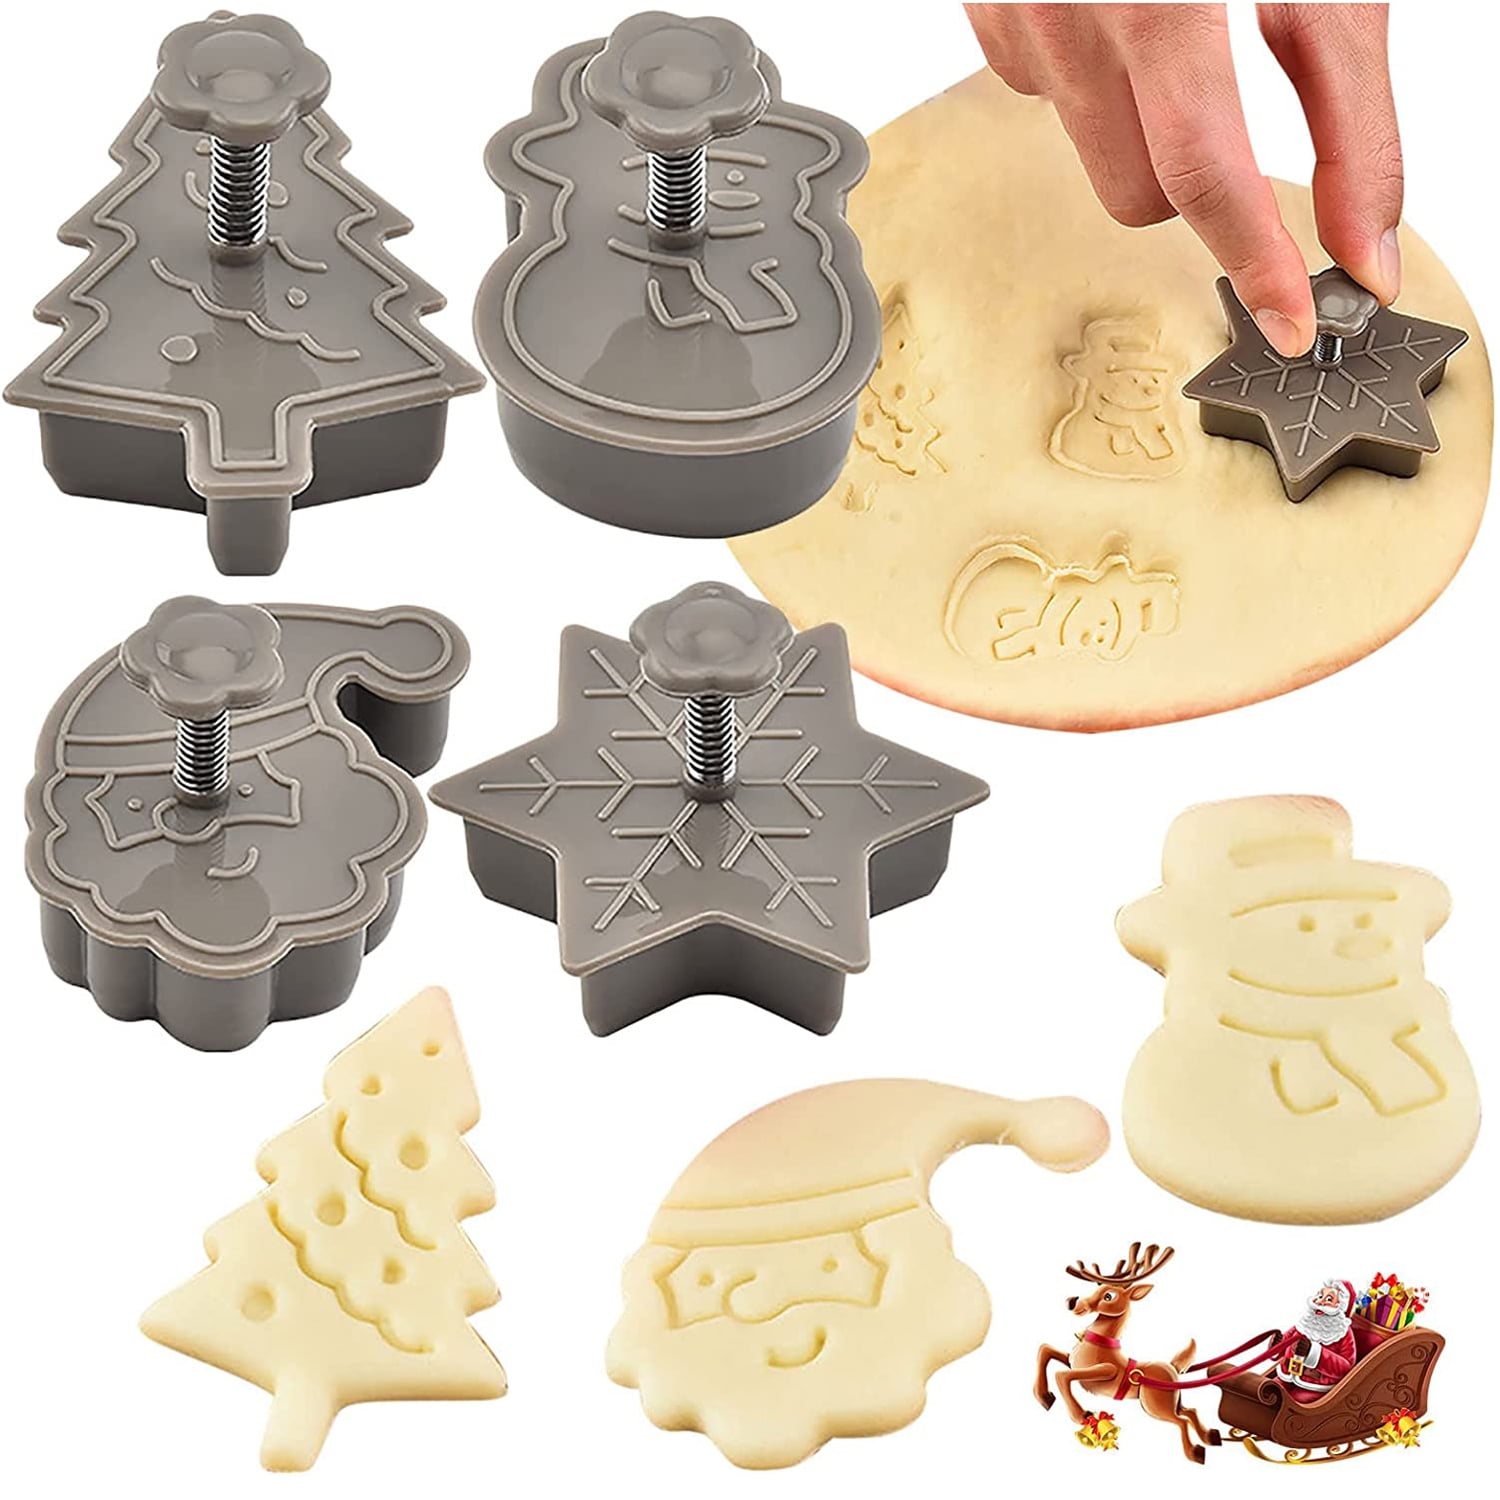 10pcs, Snowflake Cookie Cutters, Metal Pastry Cutter Set, Biscuit Molds,  Baking Tools, Kitchen Accessories, Christmas Decor